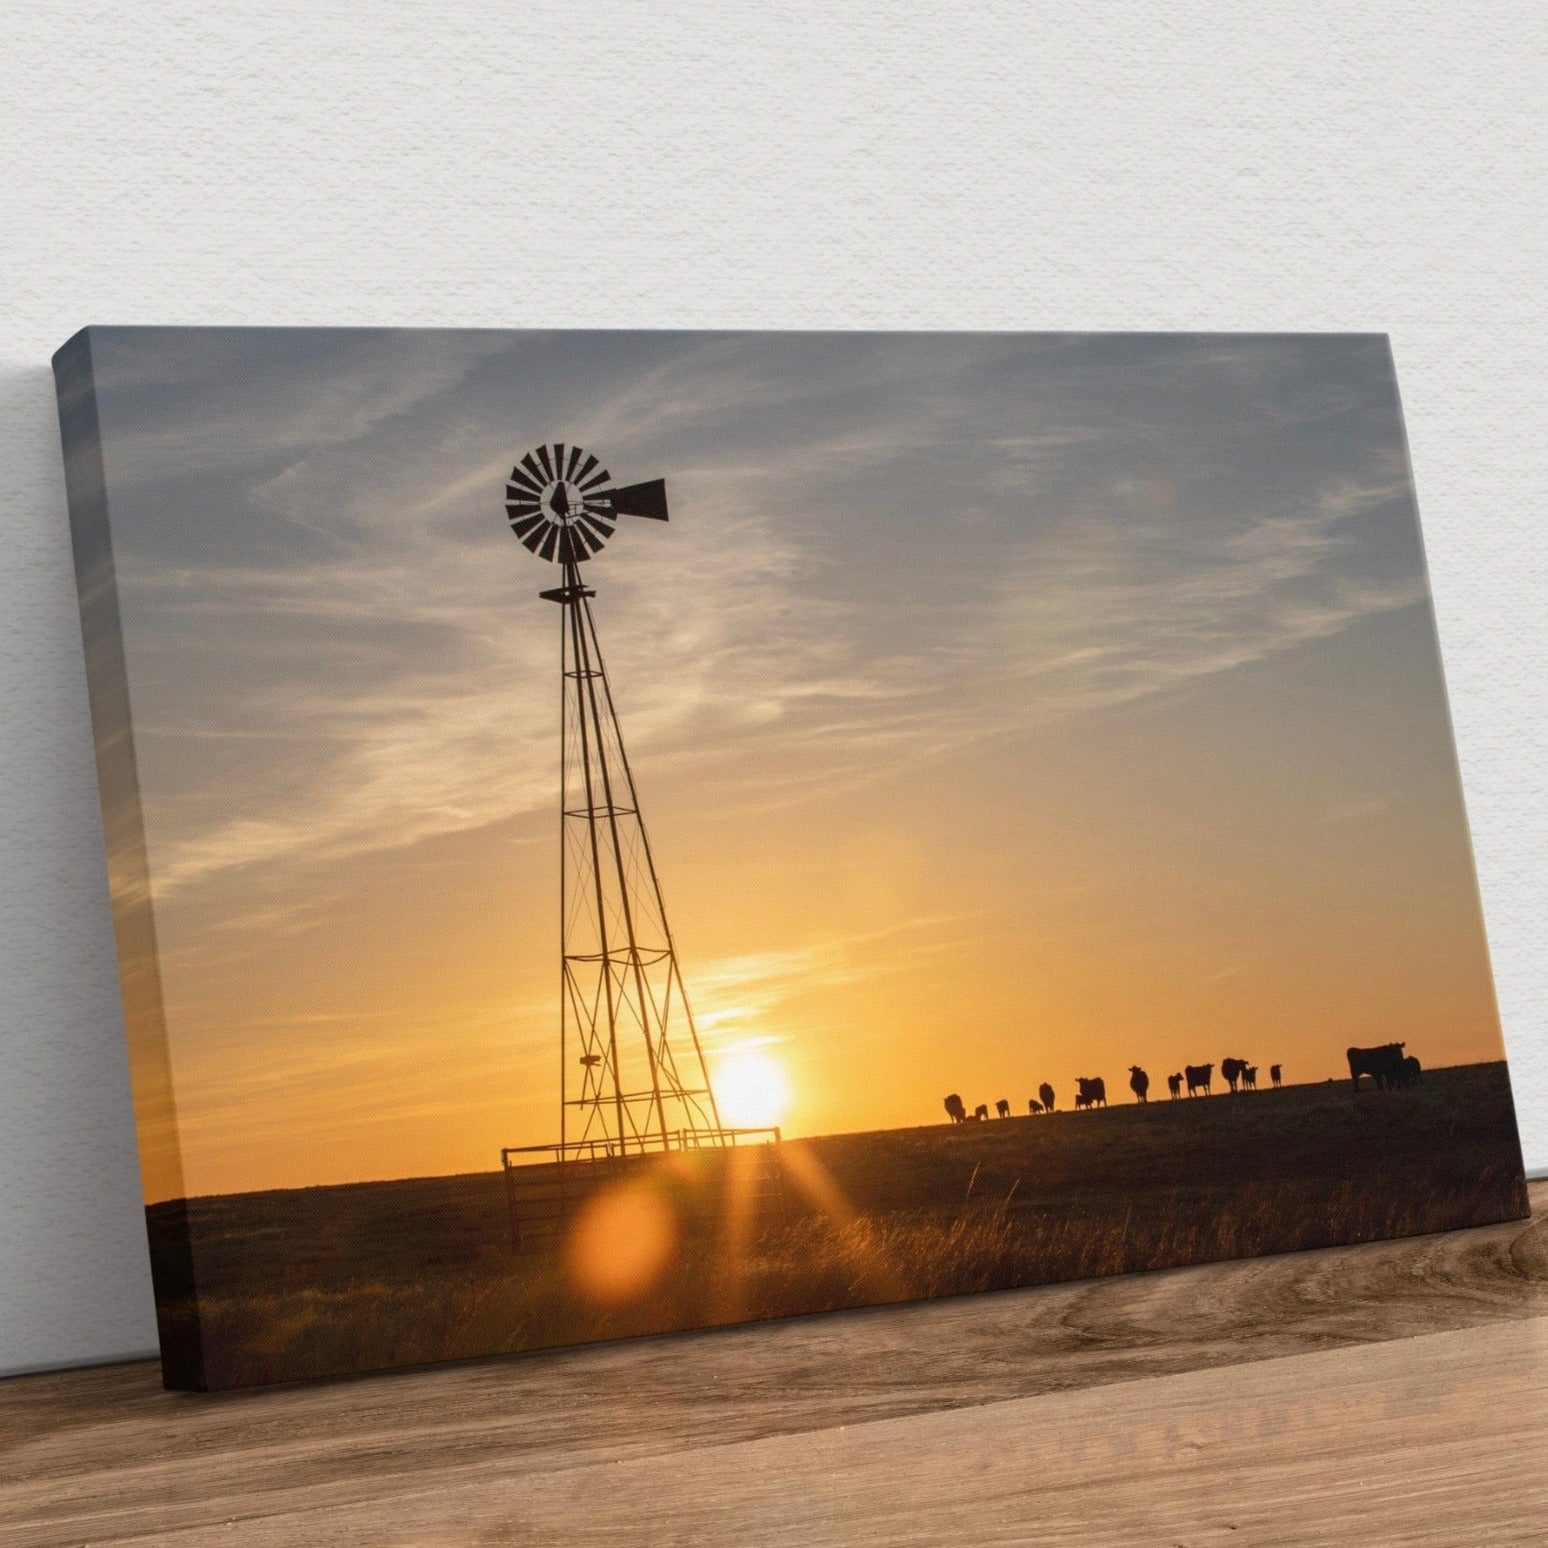 Old Windmill at Sunset with Angus Cattle Canvas-Unframed / 12 x 18 Inches Wall Art Teri James Photography